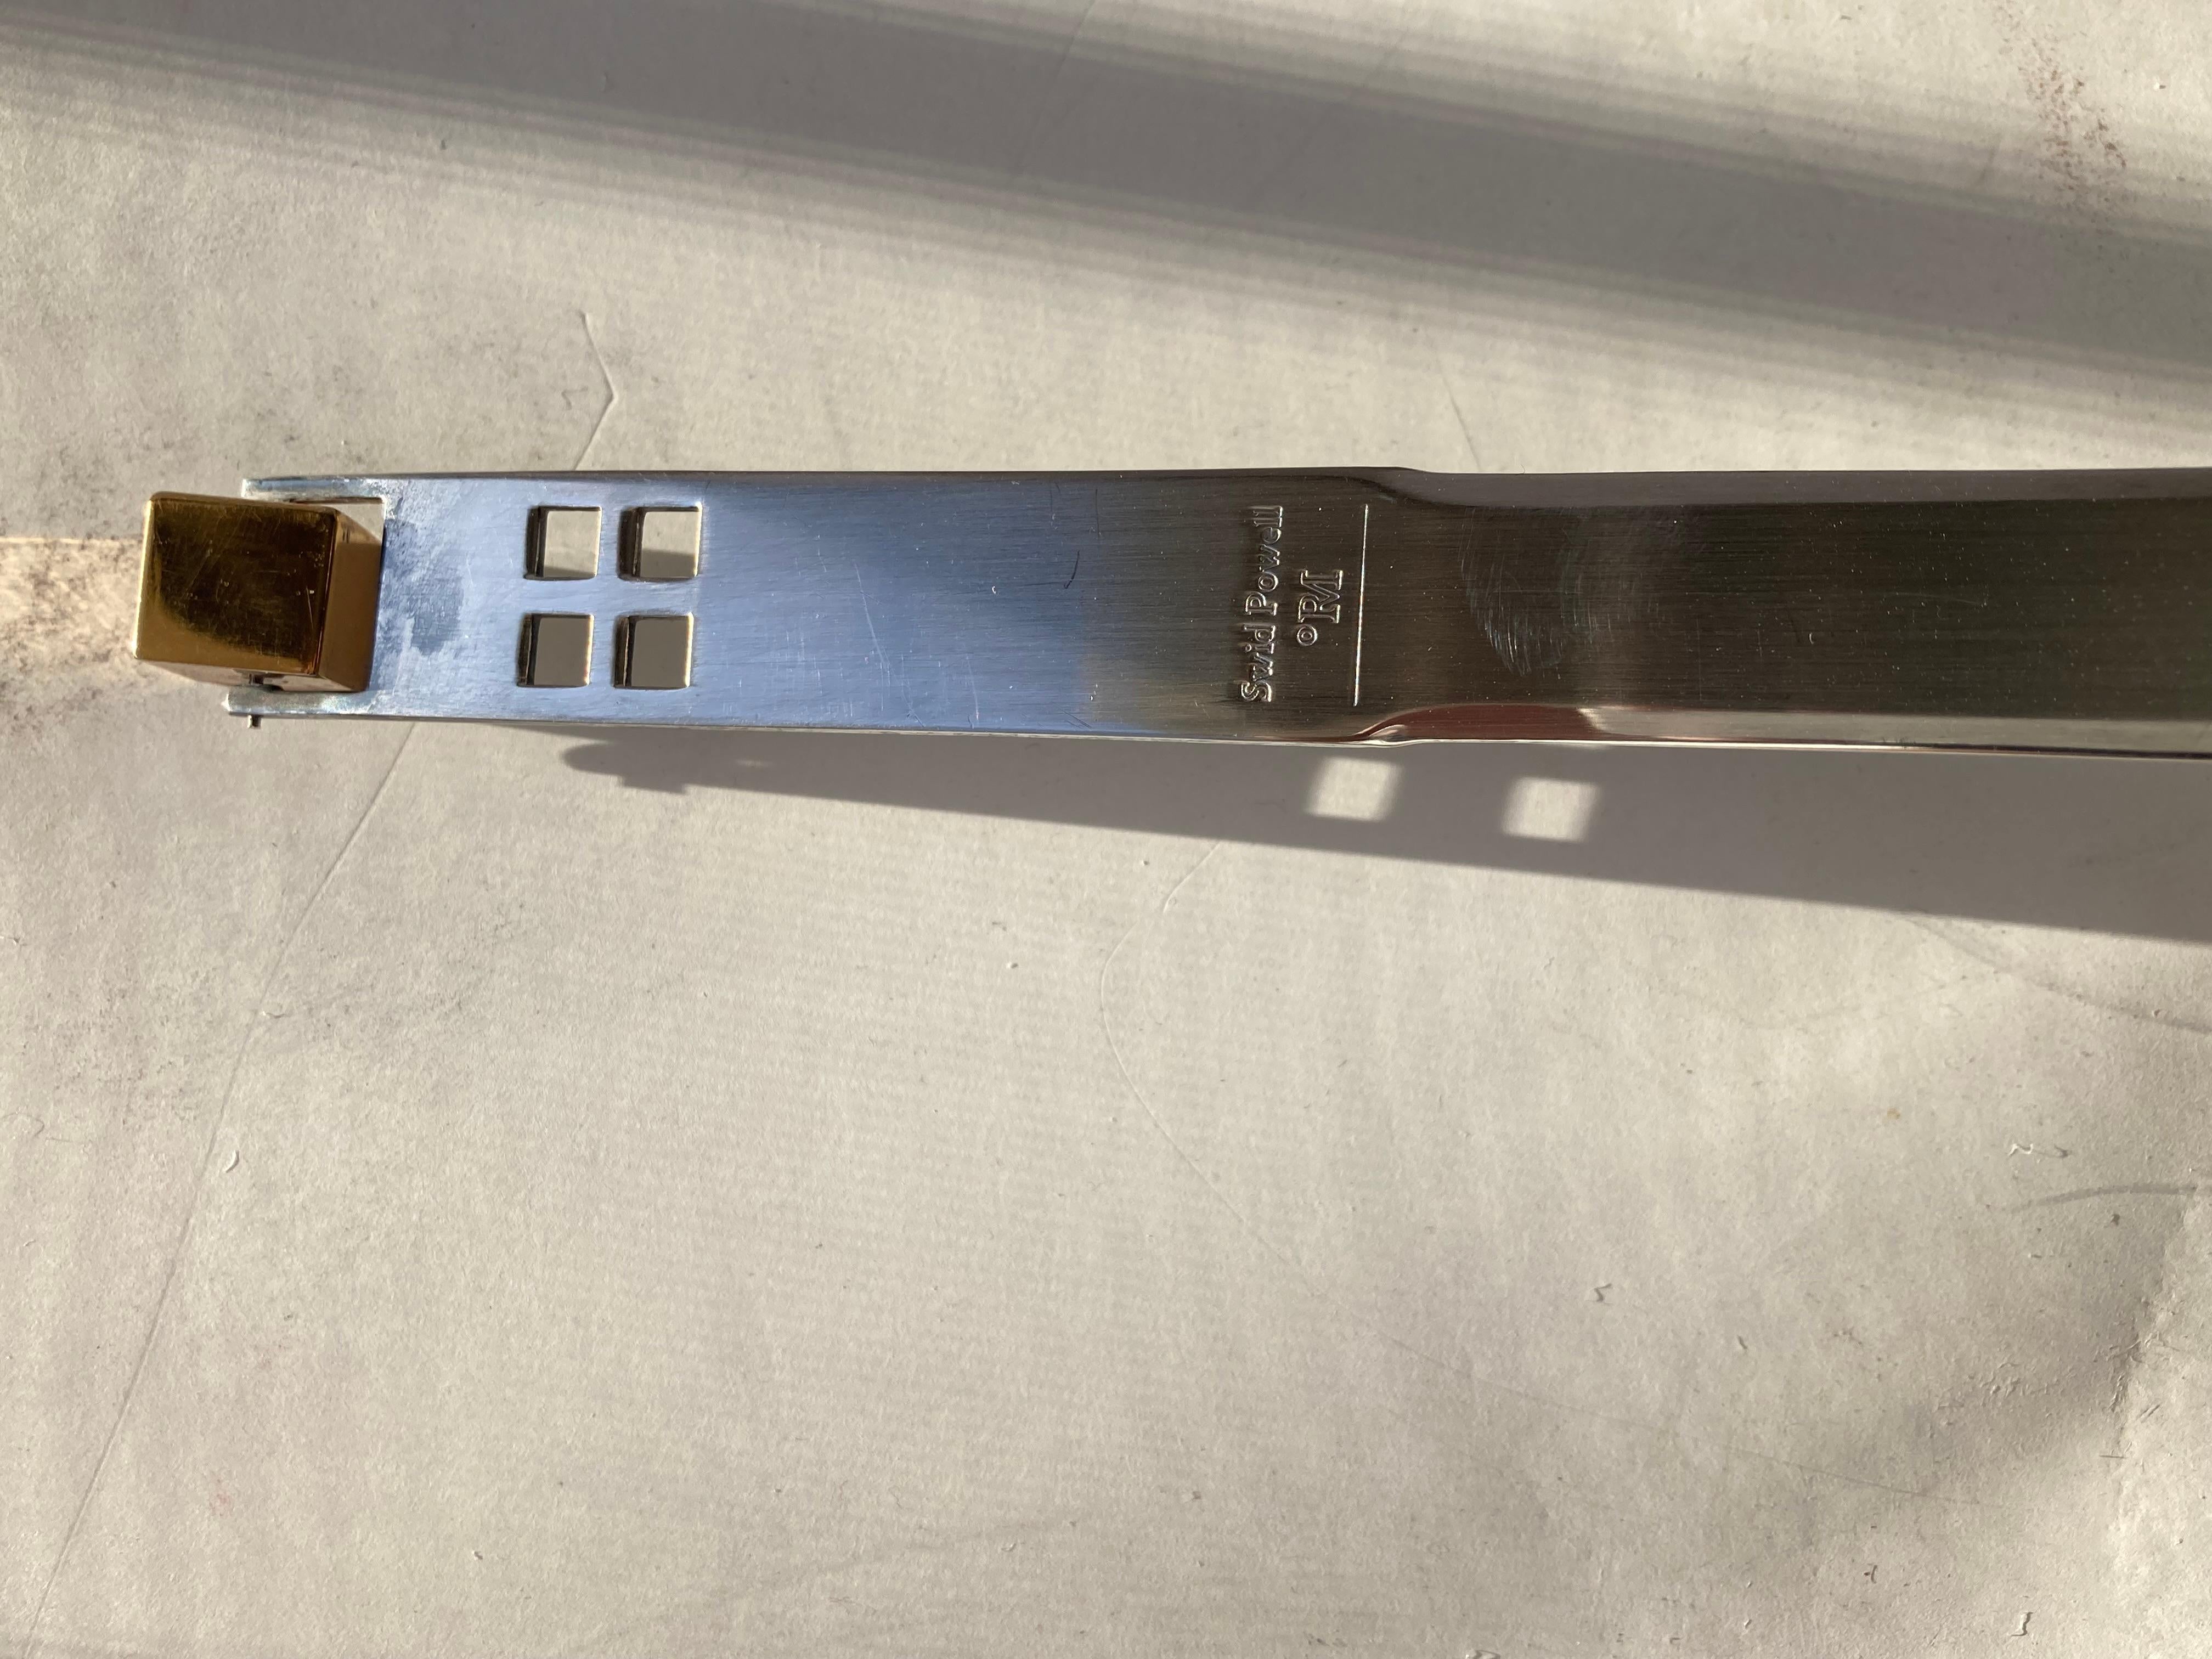 Great Post Modern design in this letter opener, by Richard Meier. The cube gold tone in back spins nicely and is a whimsical detail.